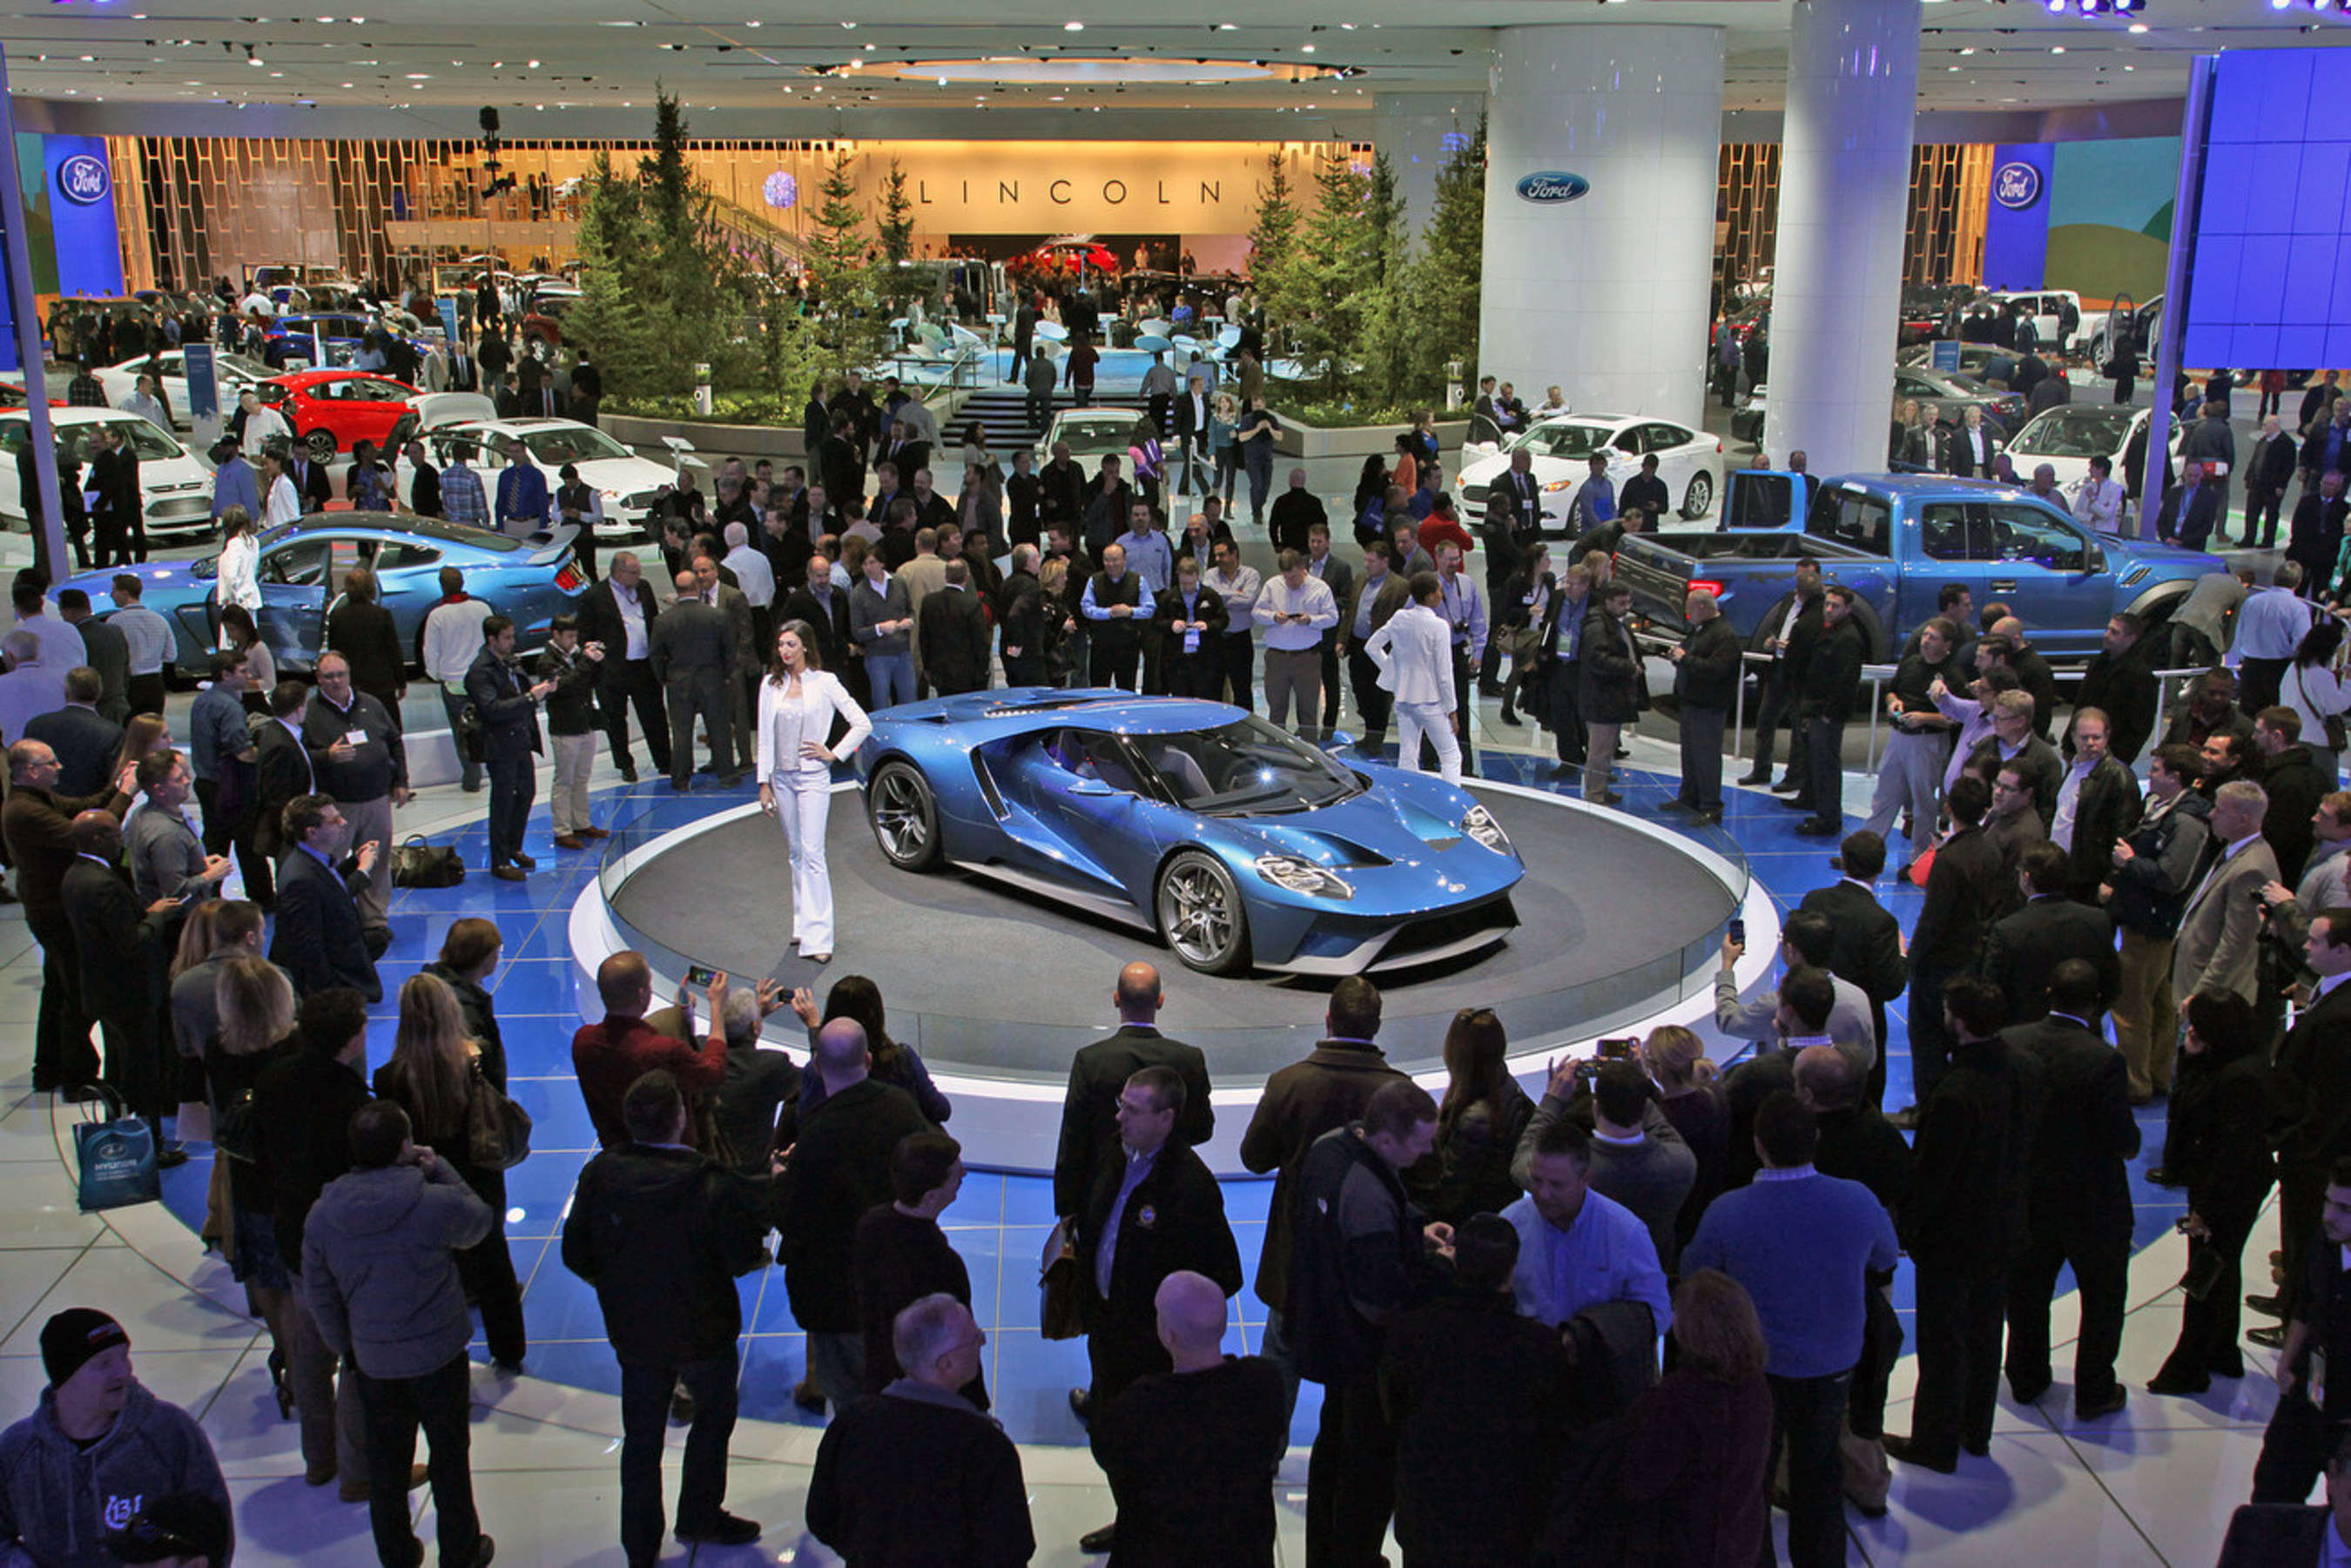 The Ford GT super car was a super star at the 2015 NAIAS, and drew huge crowds of enthusiastic fans throughout the show.